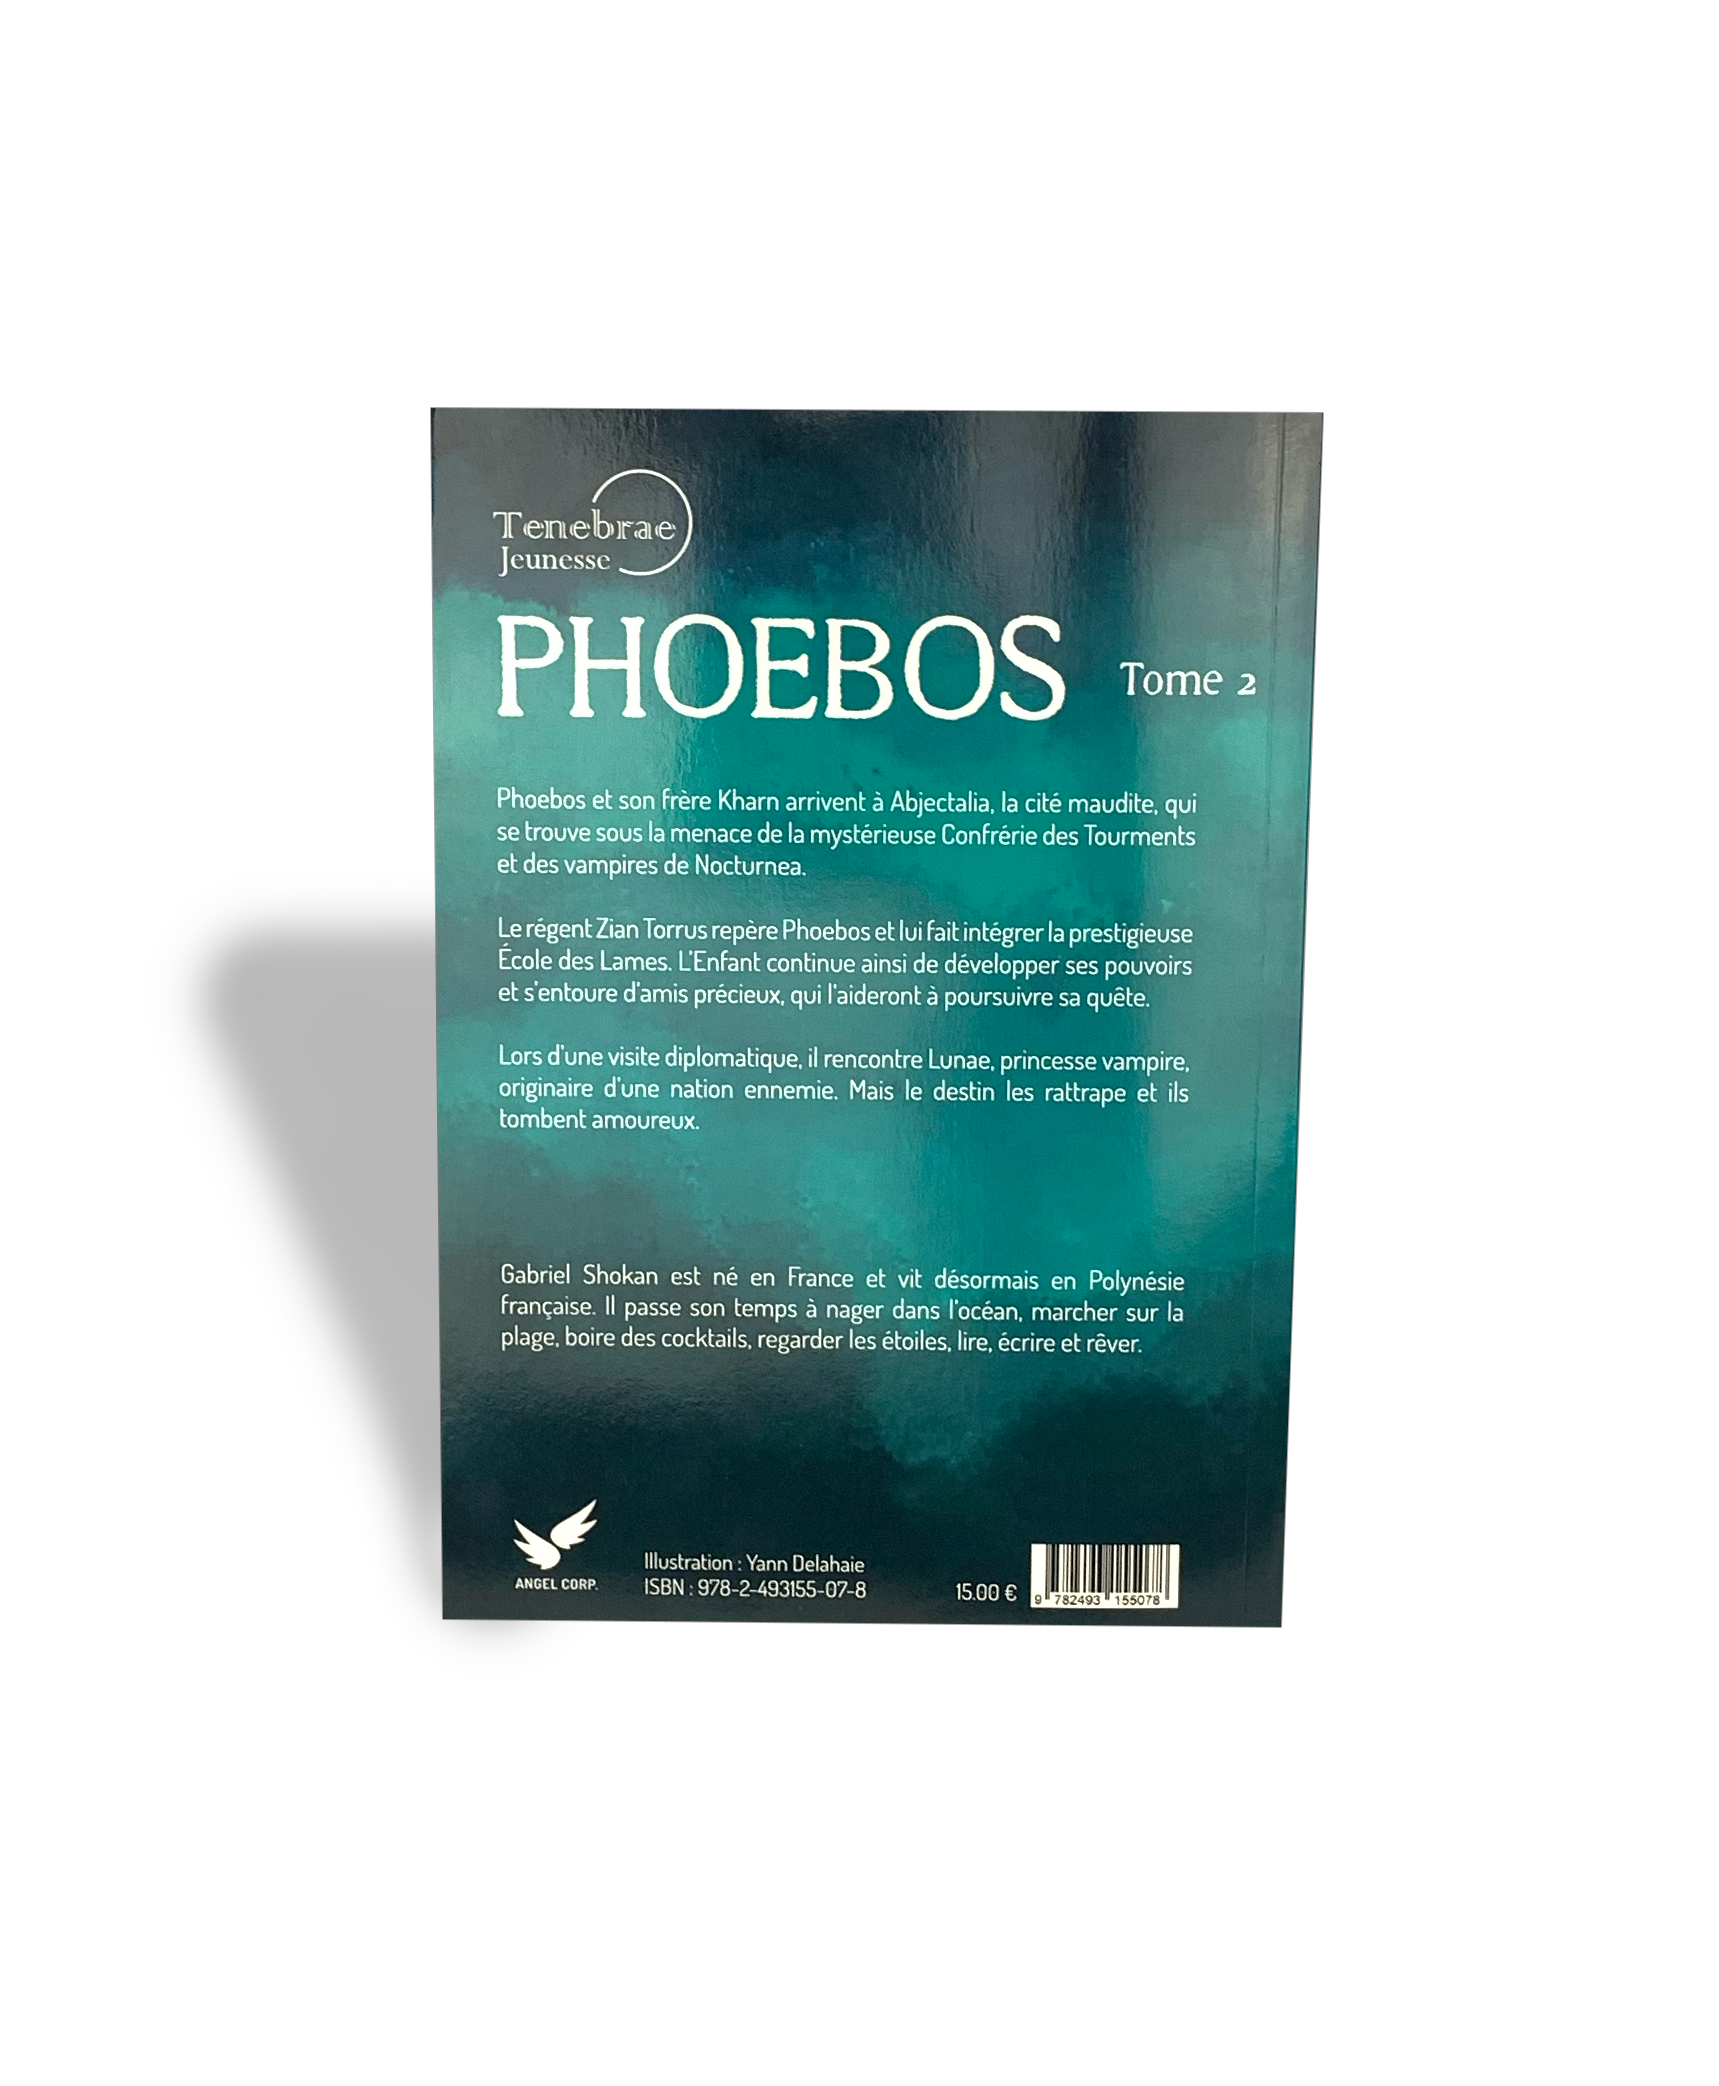 Phoebos - Jeunesse Tome 2